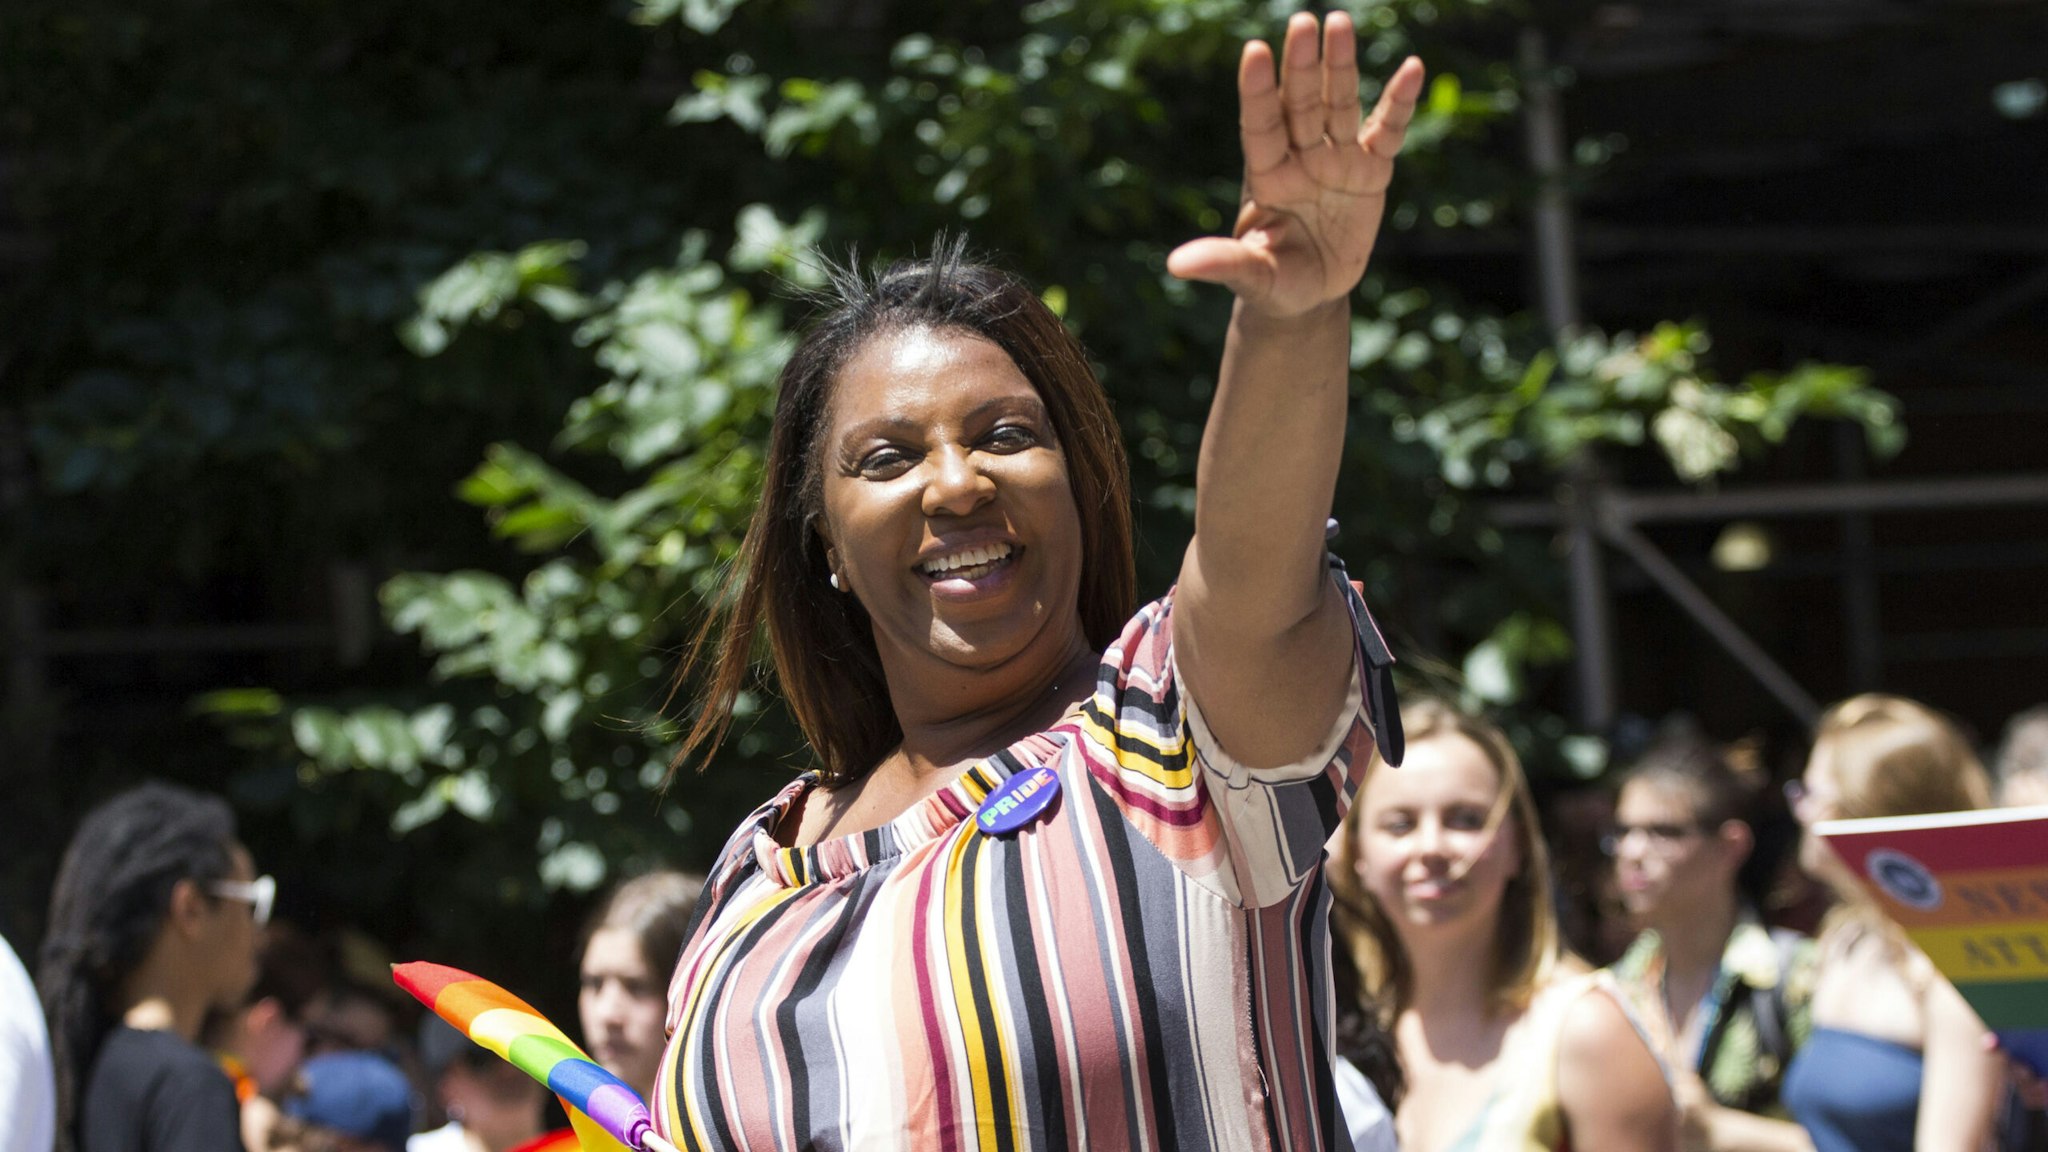 New York State Attorney General Letitia James marches at the annual Pride Parade on Sunday, June 29, 2019 in New York, NY. This years annual Pride Parade celebrates the 50th Anniversary of the Stonewall Uprising and a half-century of LGBTQ+ liberation.